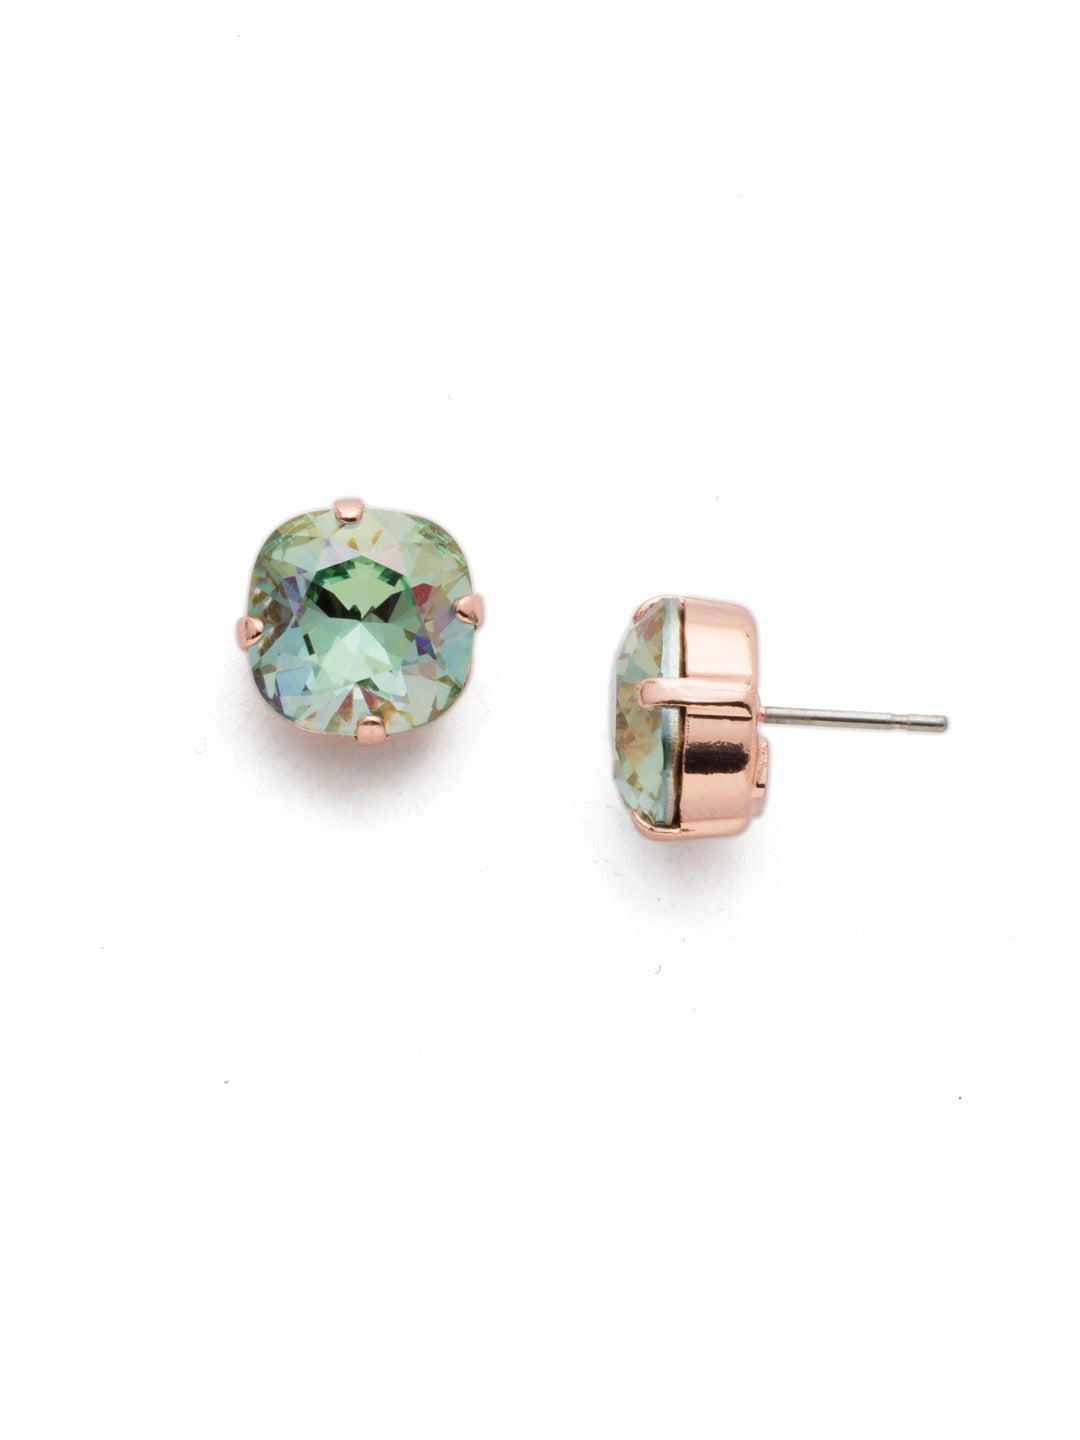 Halcyon Stud Earrings - EDH25RGCAZ - A beautiful, luminous cushion-cut crystal in a classic four-pronged setting that's ideal for everyday wear. From Sorrelli's Crystal Azure collection in our Rose Gold-tone finish.